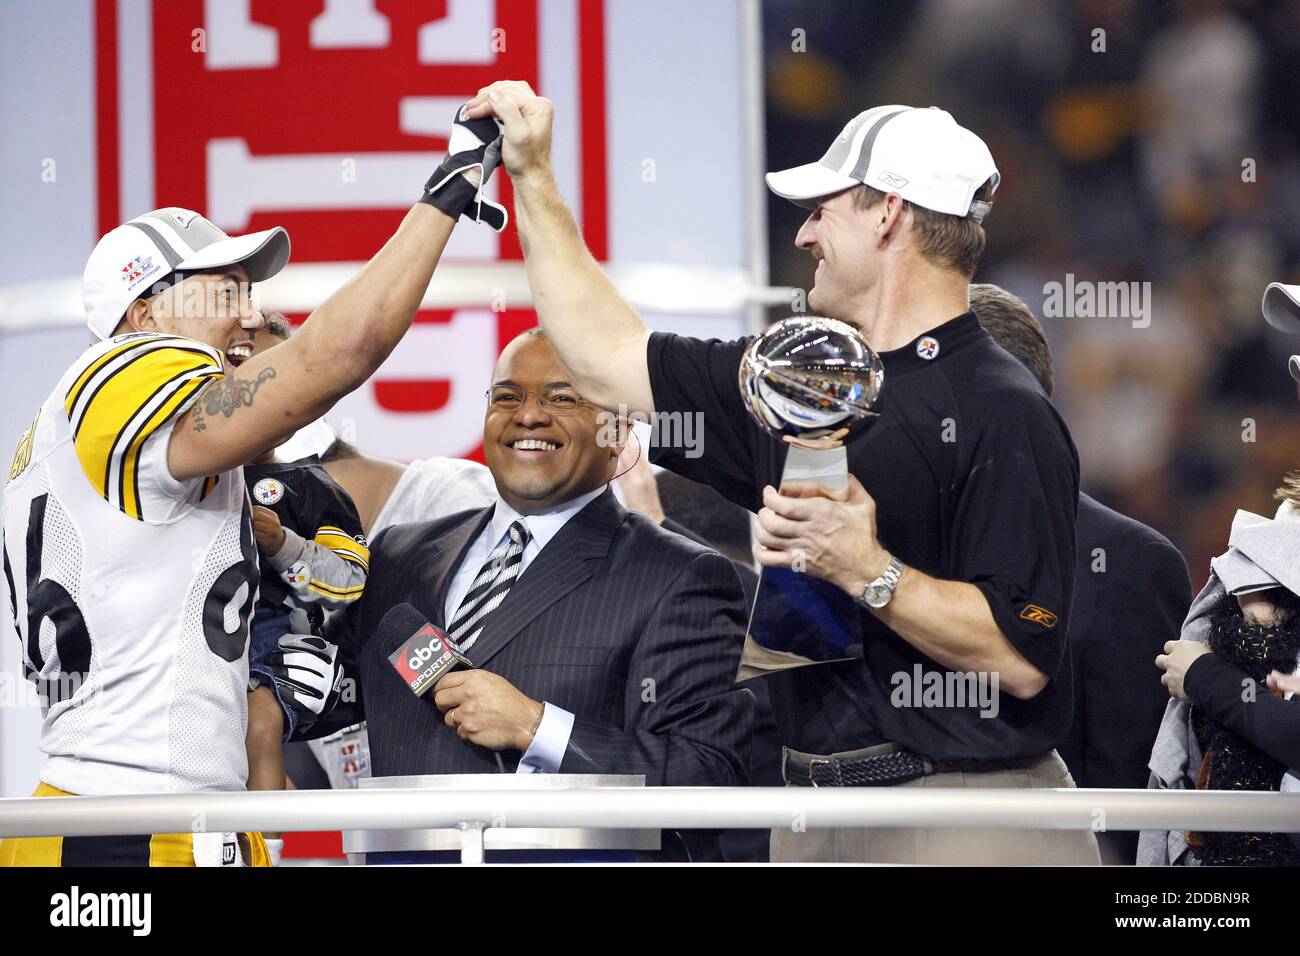 NO FILM, NO VIDEO, NO TV, NO DOCUMENTARY - Pittsburgh Steelers Hines Ward, the game MVP, and head coach Mike Cowher celebrate with the Lombardi Trophy after a 21-10 victory over the Seattle Seahawks in Super Bowl XL in Detroit, Michigan, USA, on February 5, 2006. Photo by Mark Cornelison/Lexington Herald-Leader/KRT/Cameleon/ABACAPRESS.COM Stock Photo